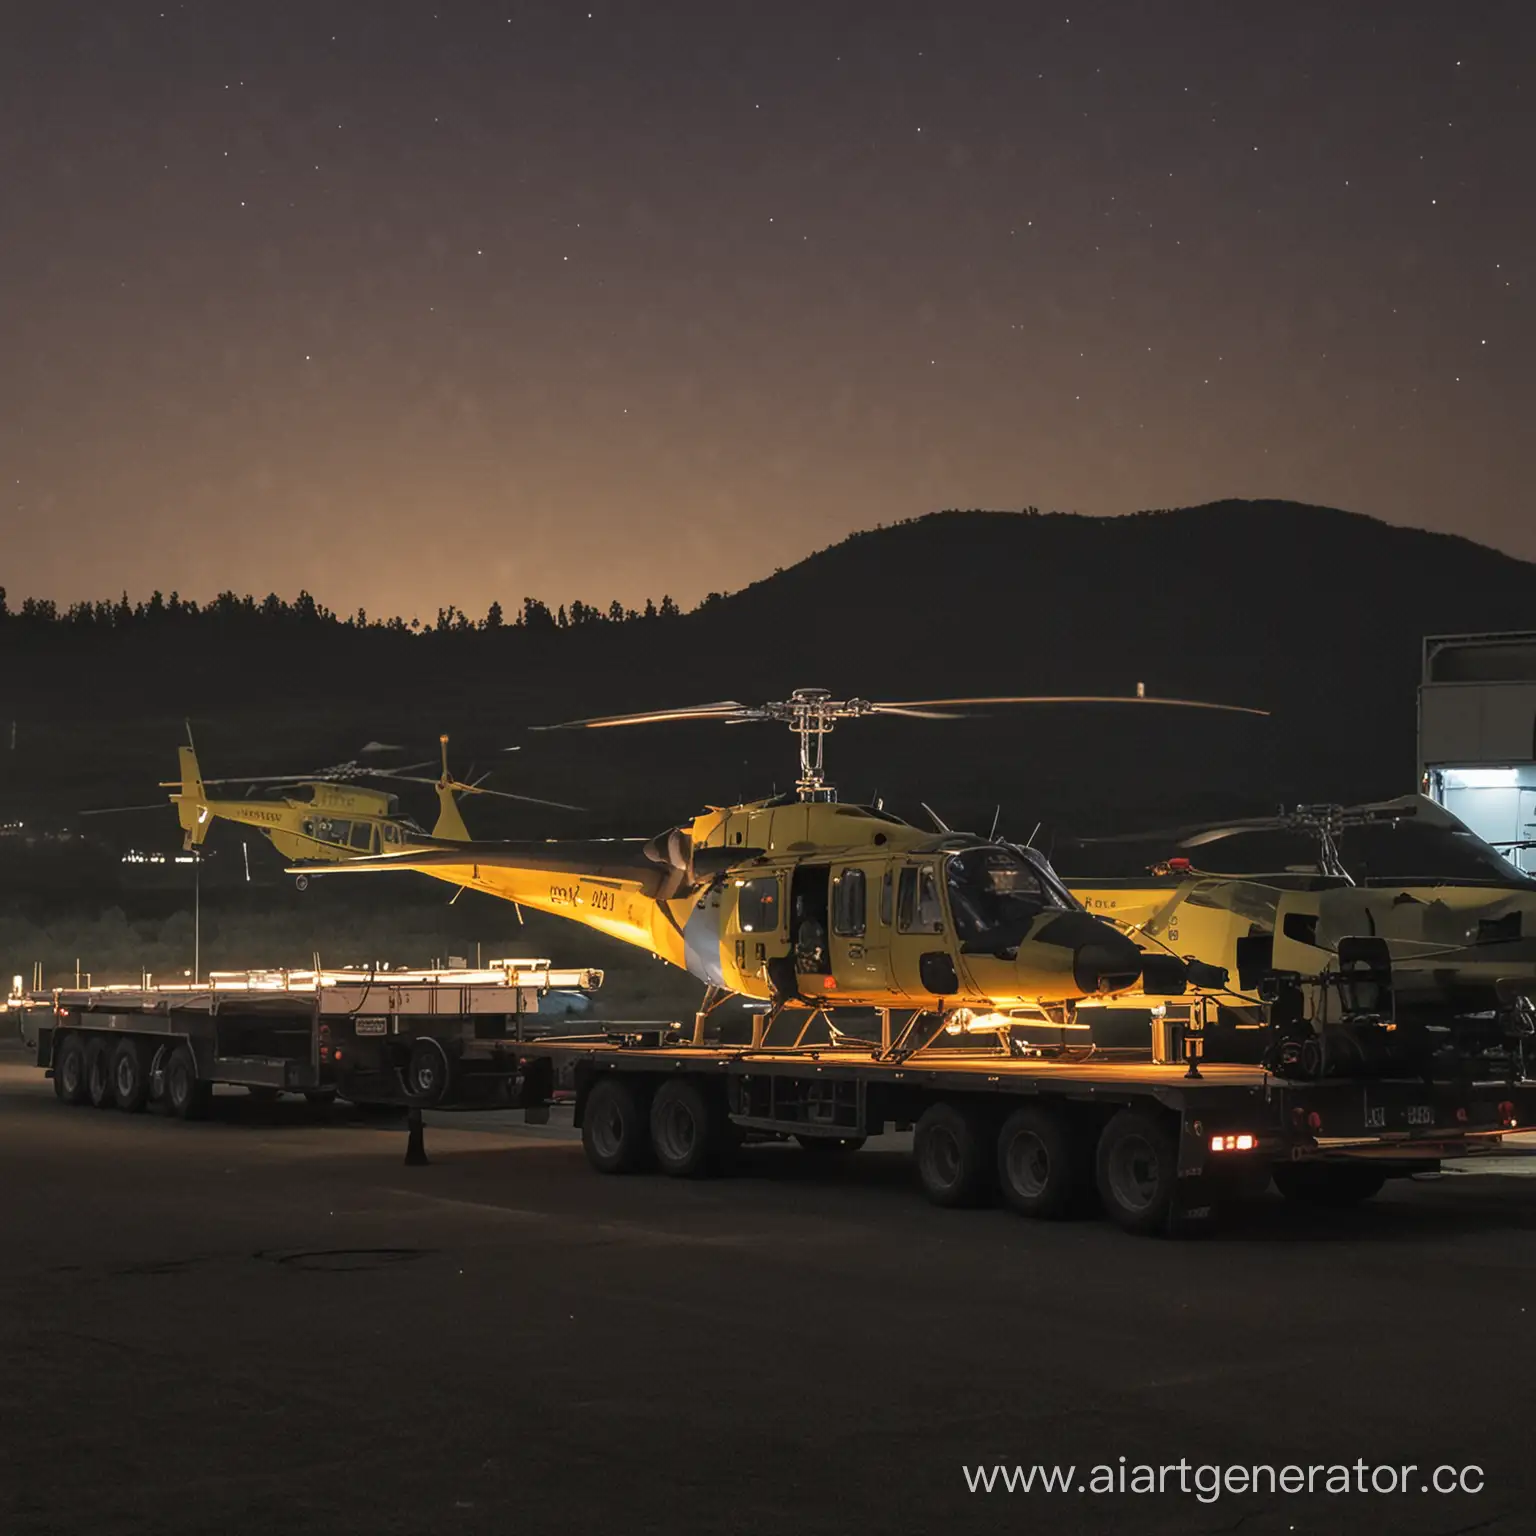 Helicopter-Transport-on-Trailer-at-Night-in-Urban-Setting